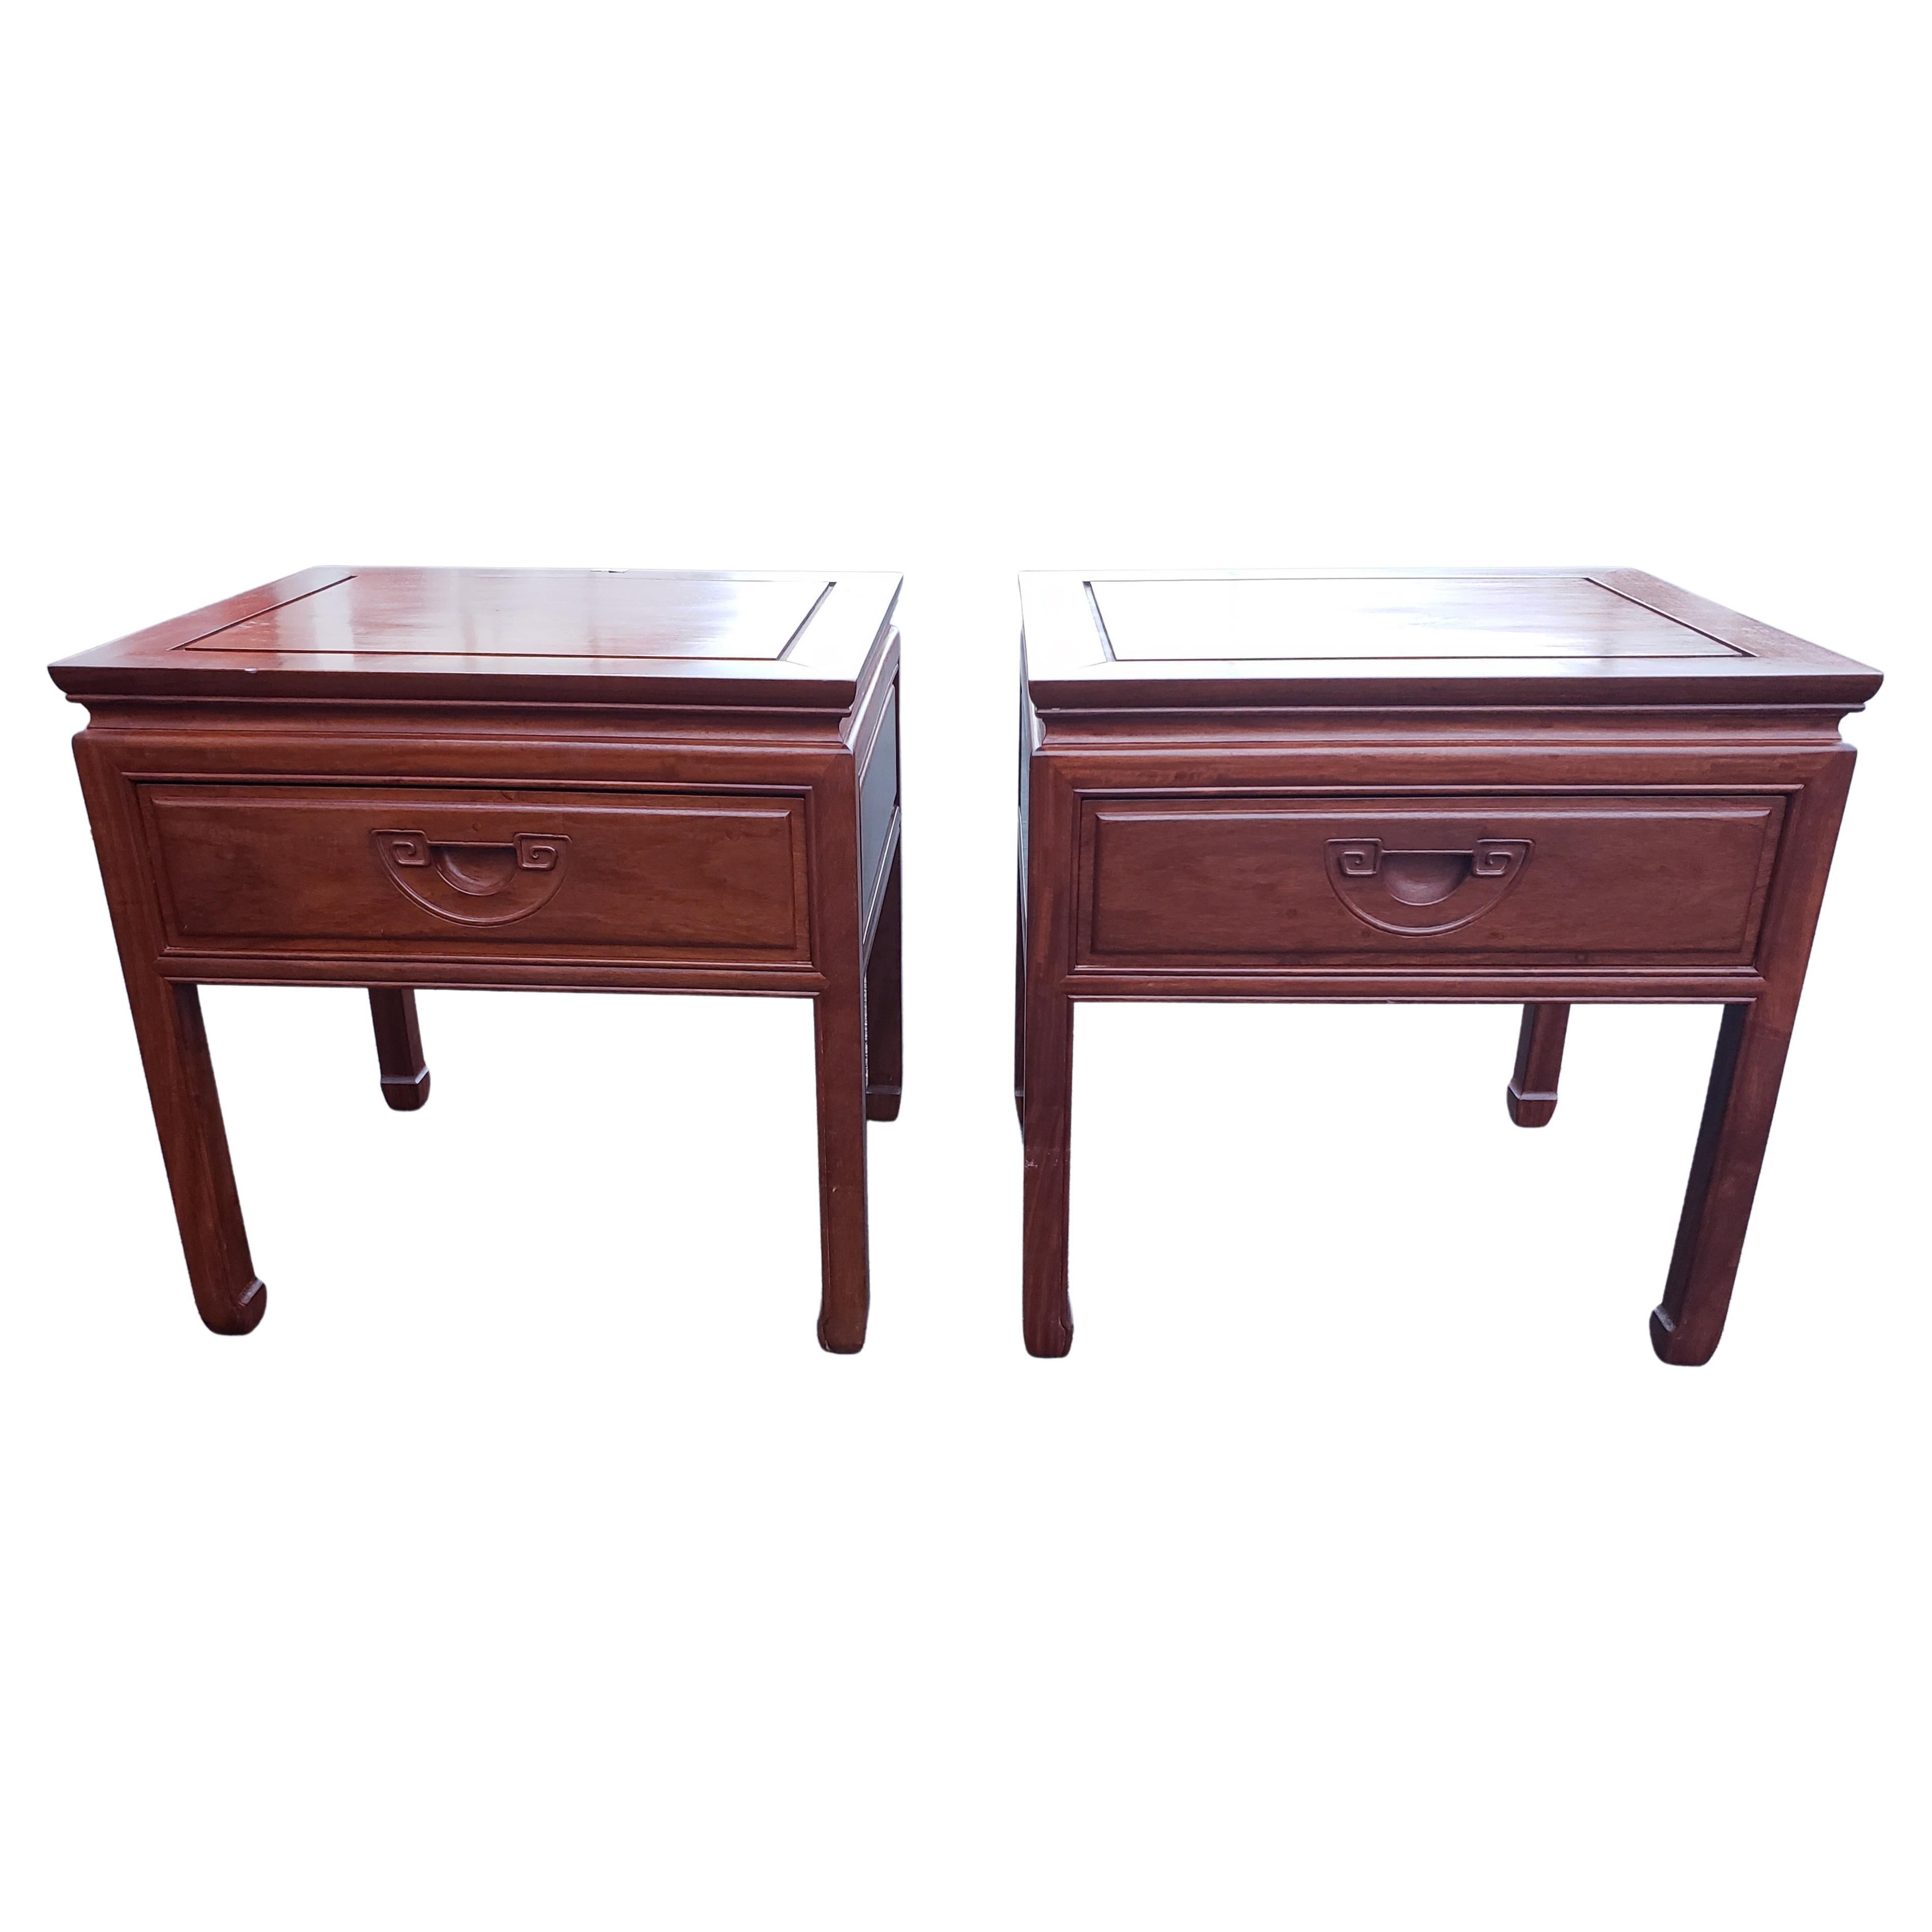 Hong Kong George Zee Rosewood Hand Crafted Side Tables W Integrated Carved Handles, a Pair